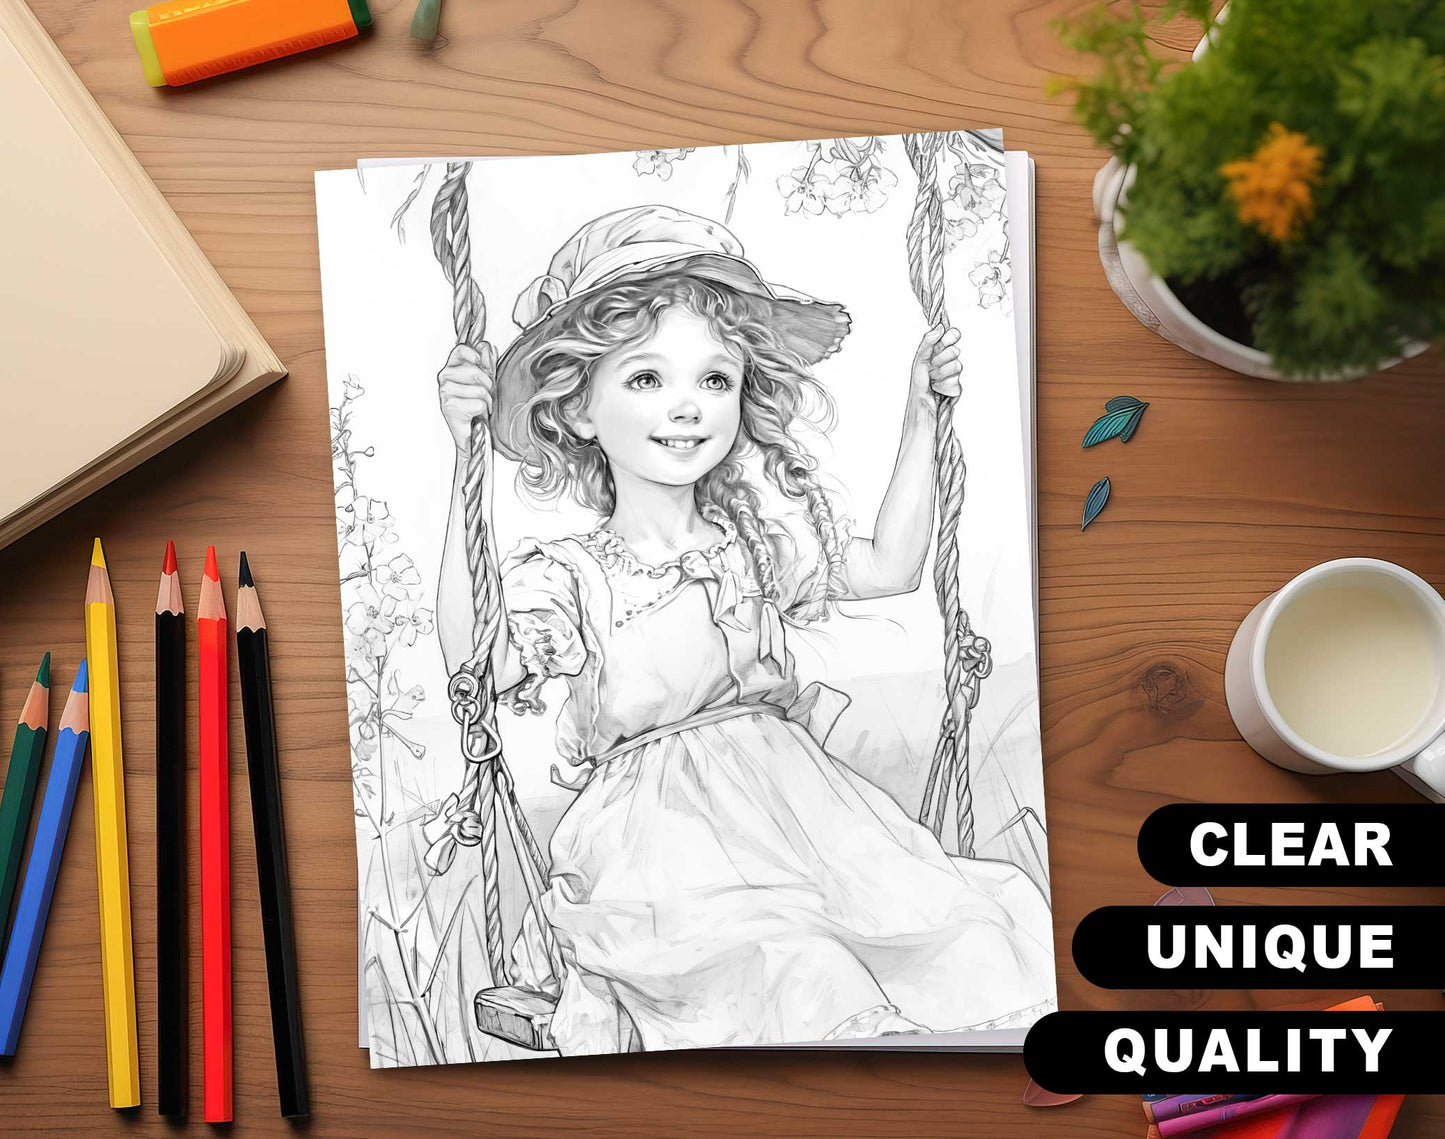 50 Little Prairie Girl Grayscale Coloring Pages - Instant Download - Printable Dark/Light